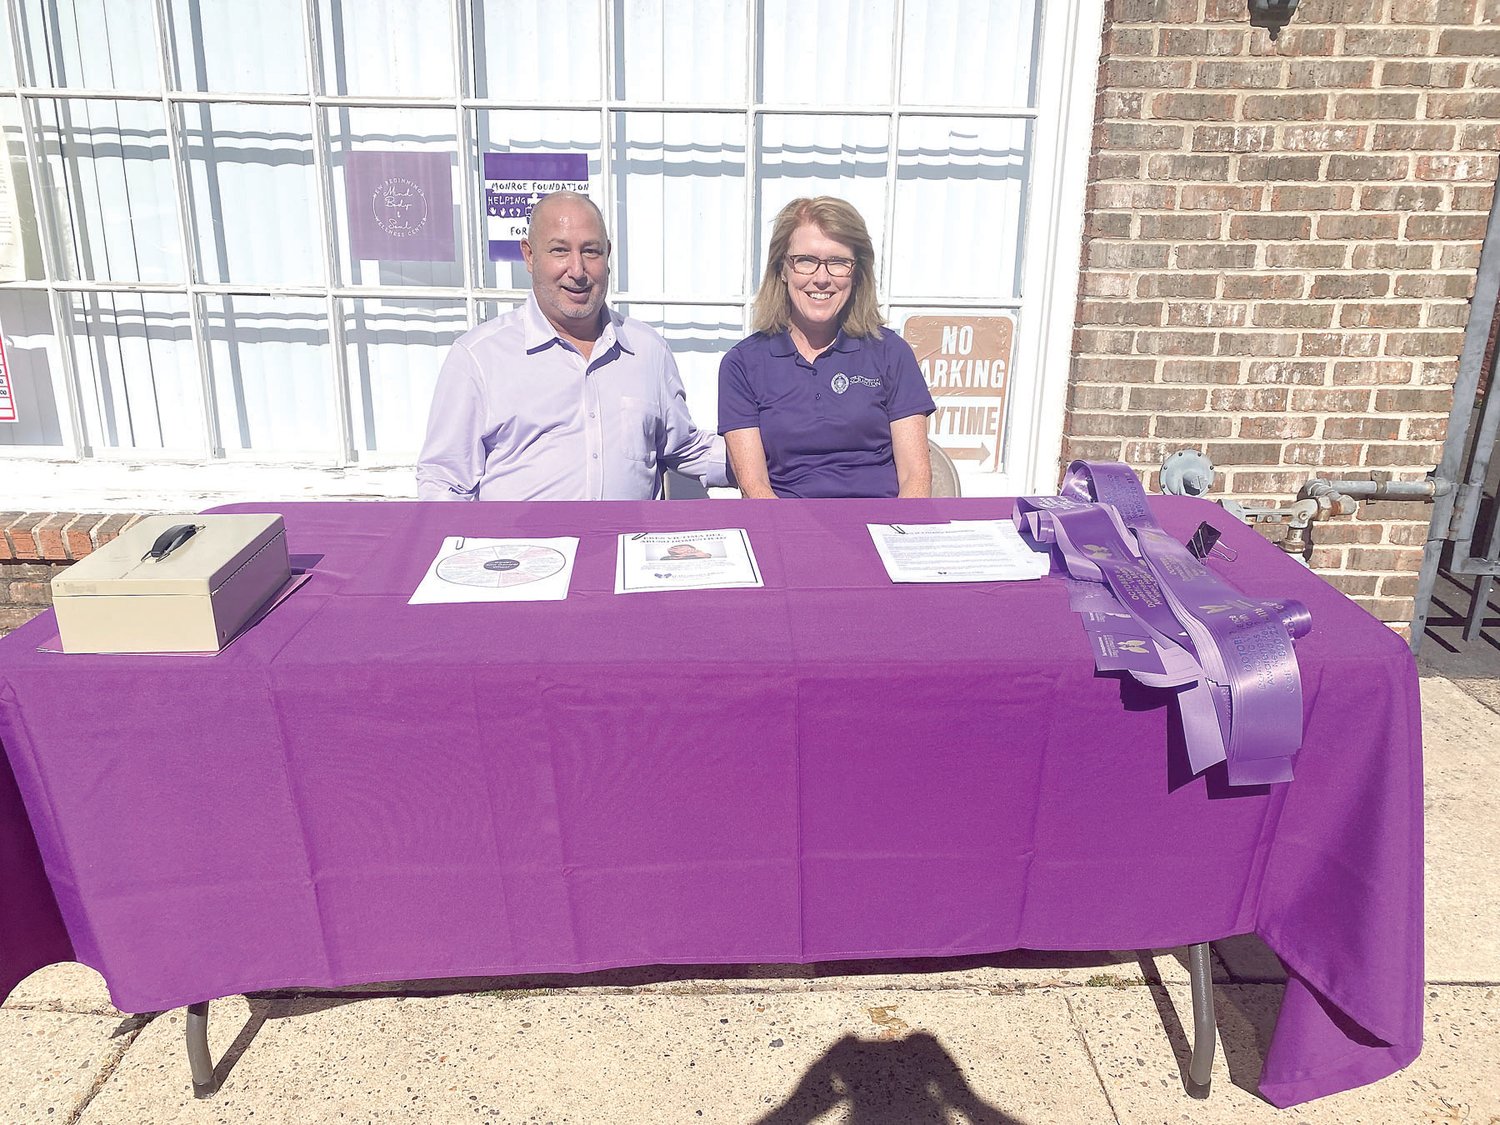 Marjie Devlin and Jay Glickman spread awareness about domestic violence during A Woman Place’s Pint the Town Purple event in Bristol.